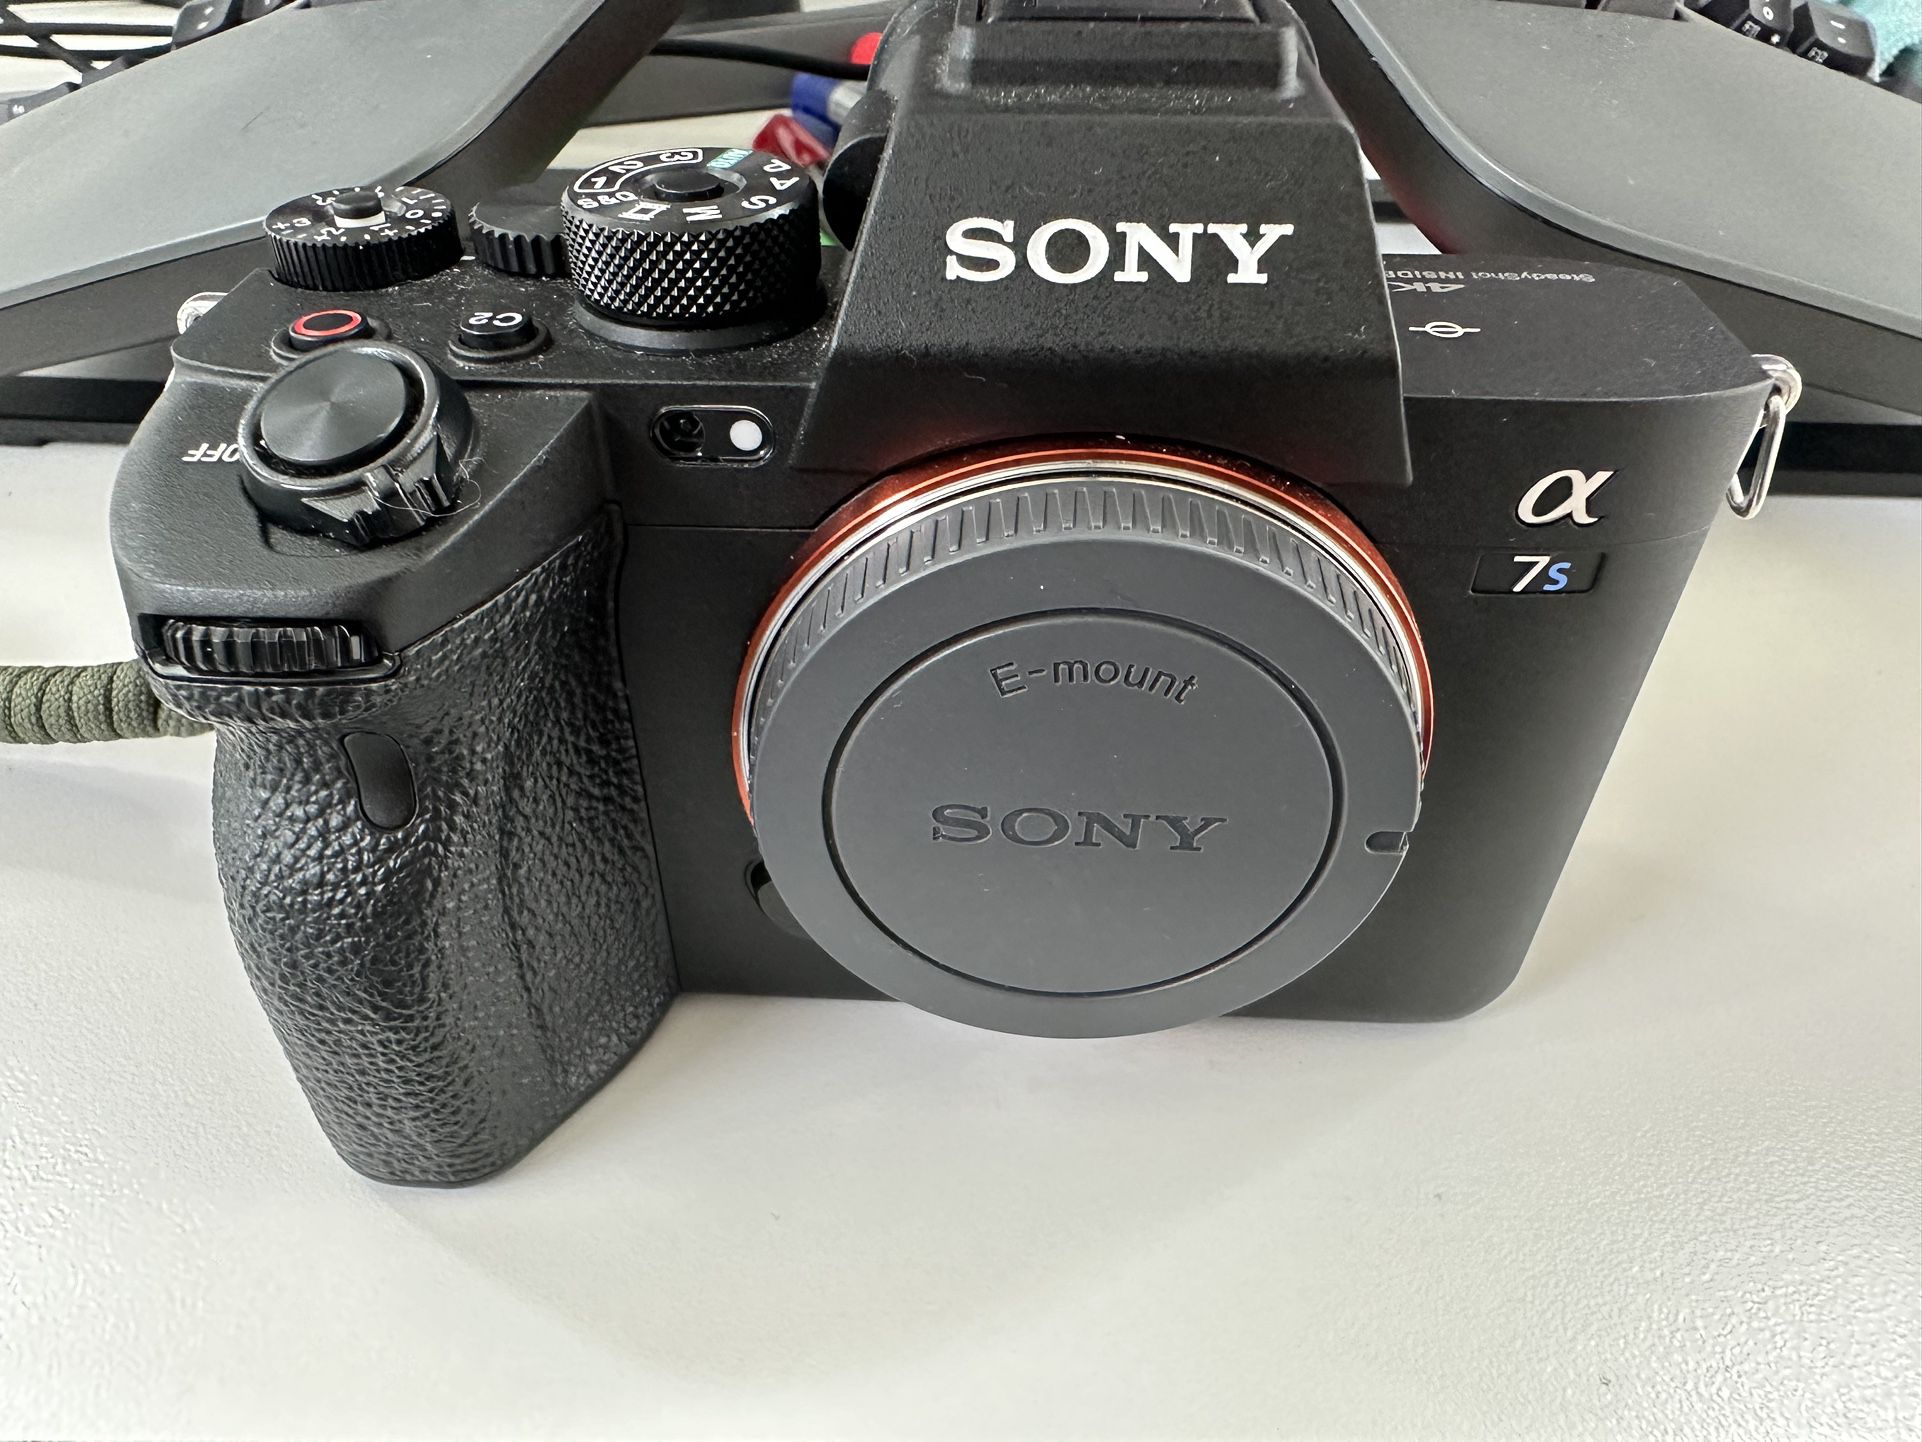 Sony a7S III Full-Frame Mirrorless Camera - Like New Condition